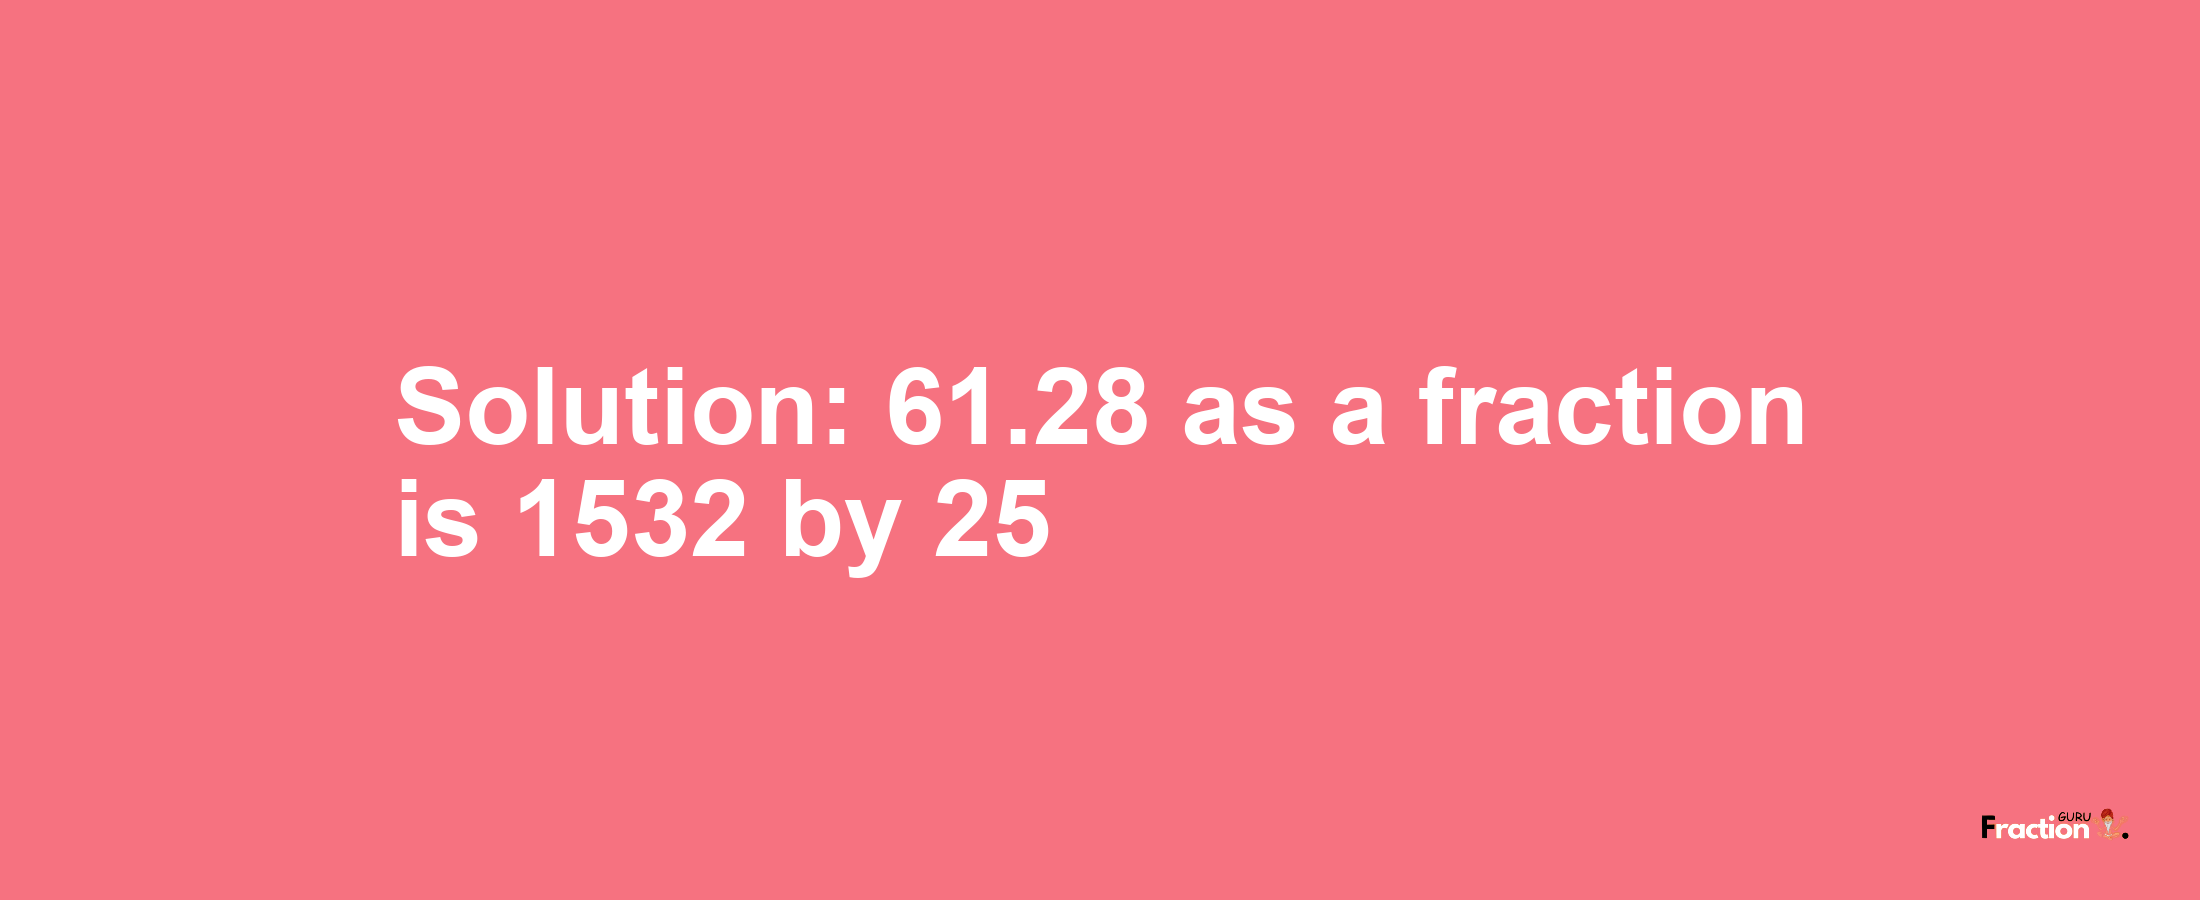 Solution:61.28 as a fraction is 1532/25